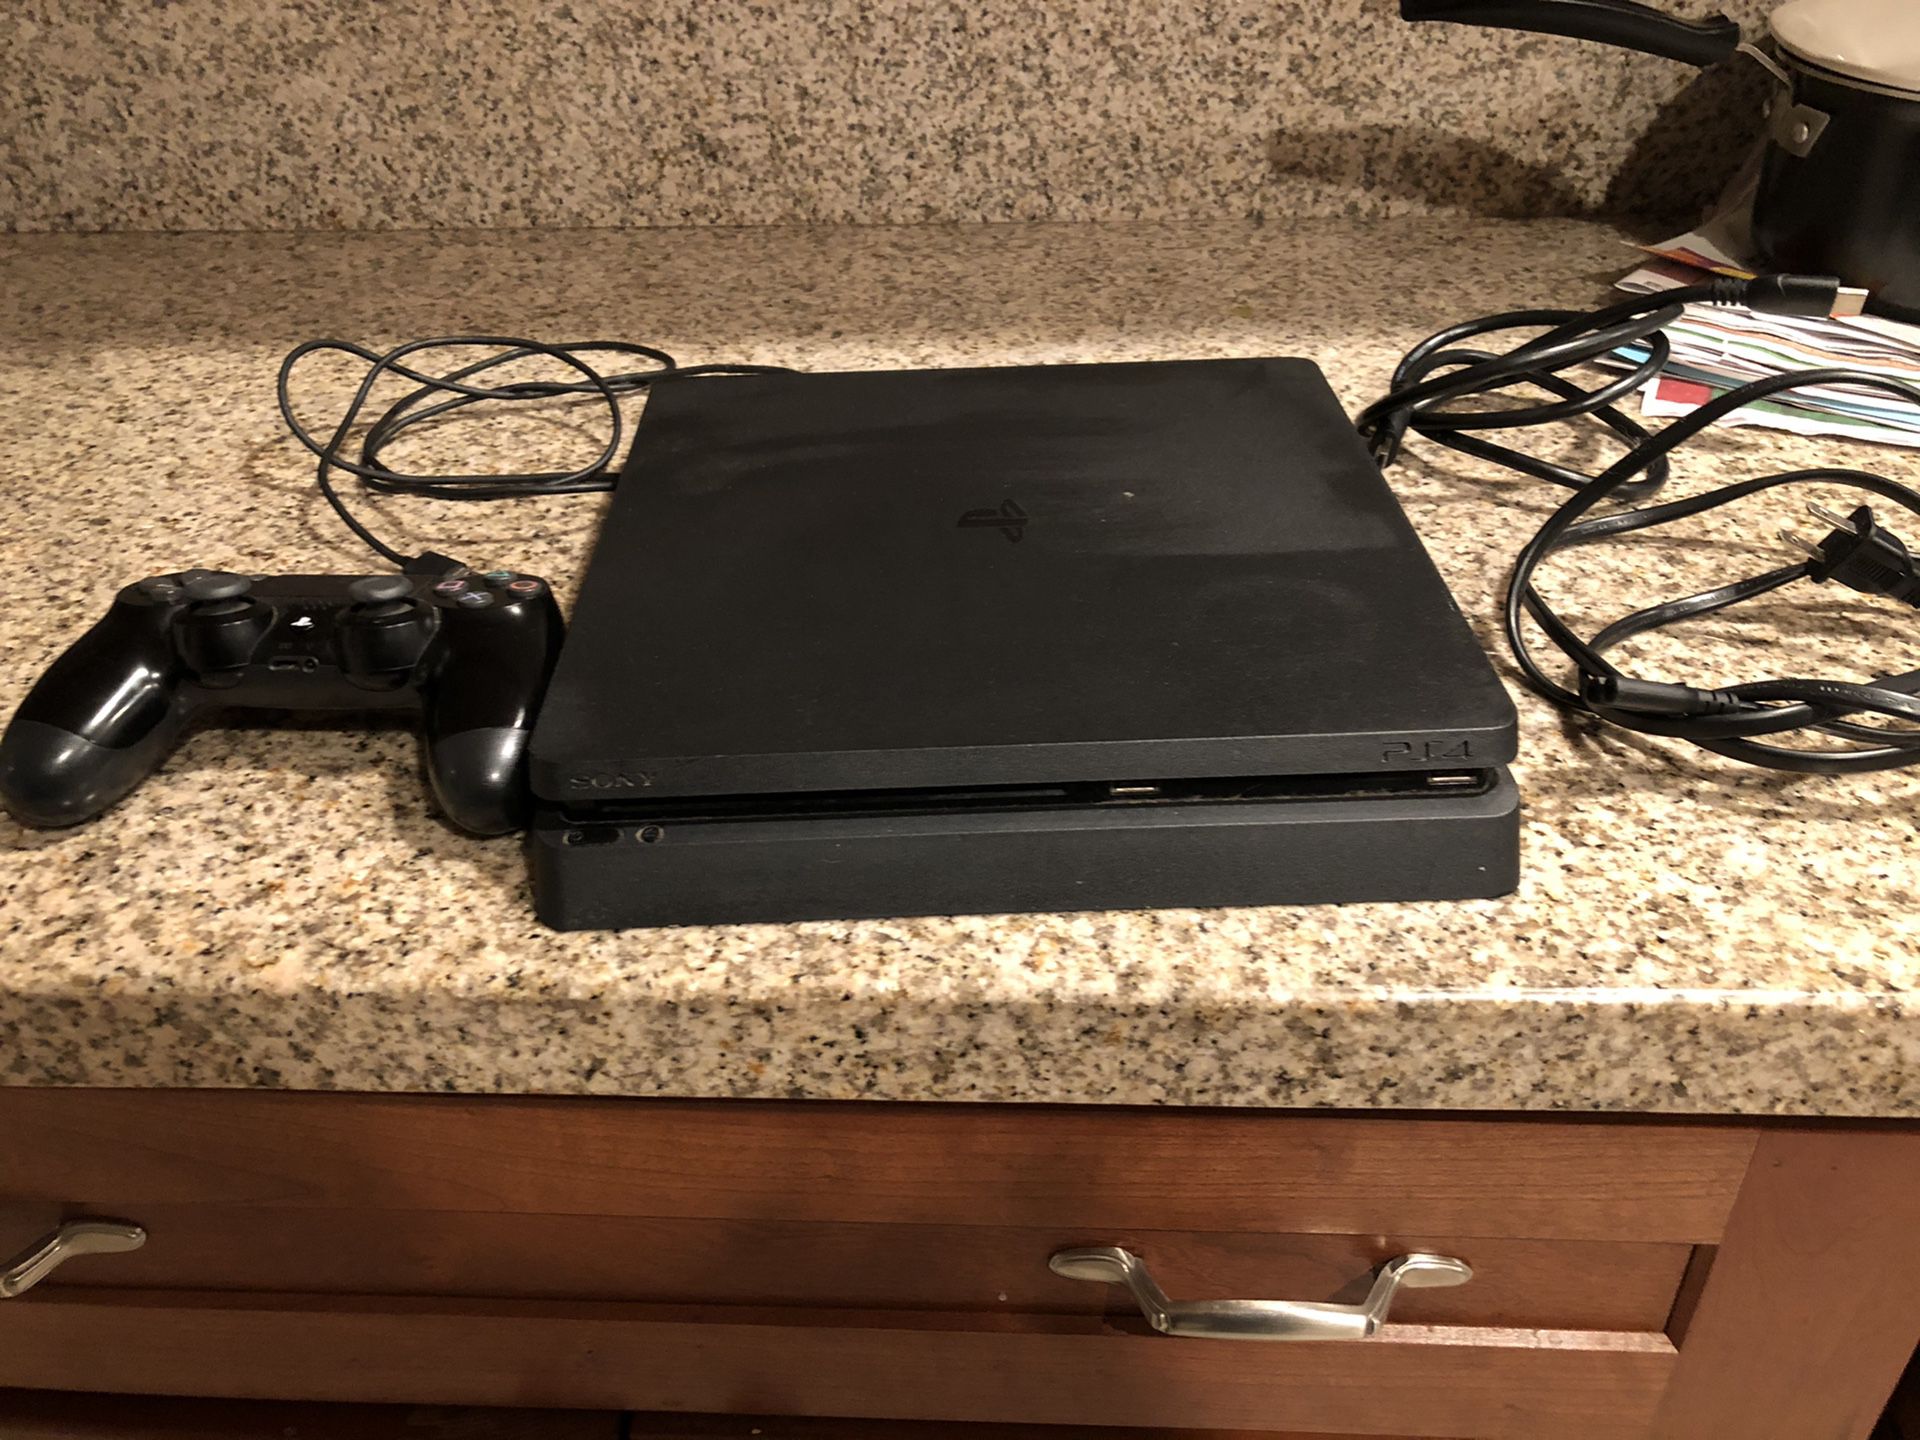 PS4 with controller and cables